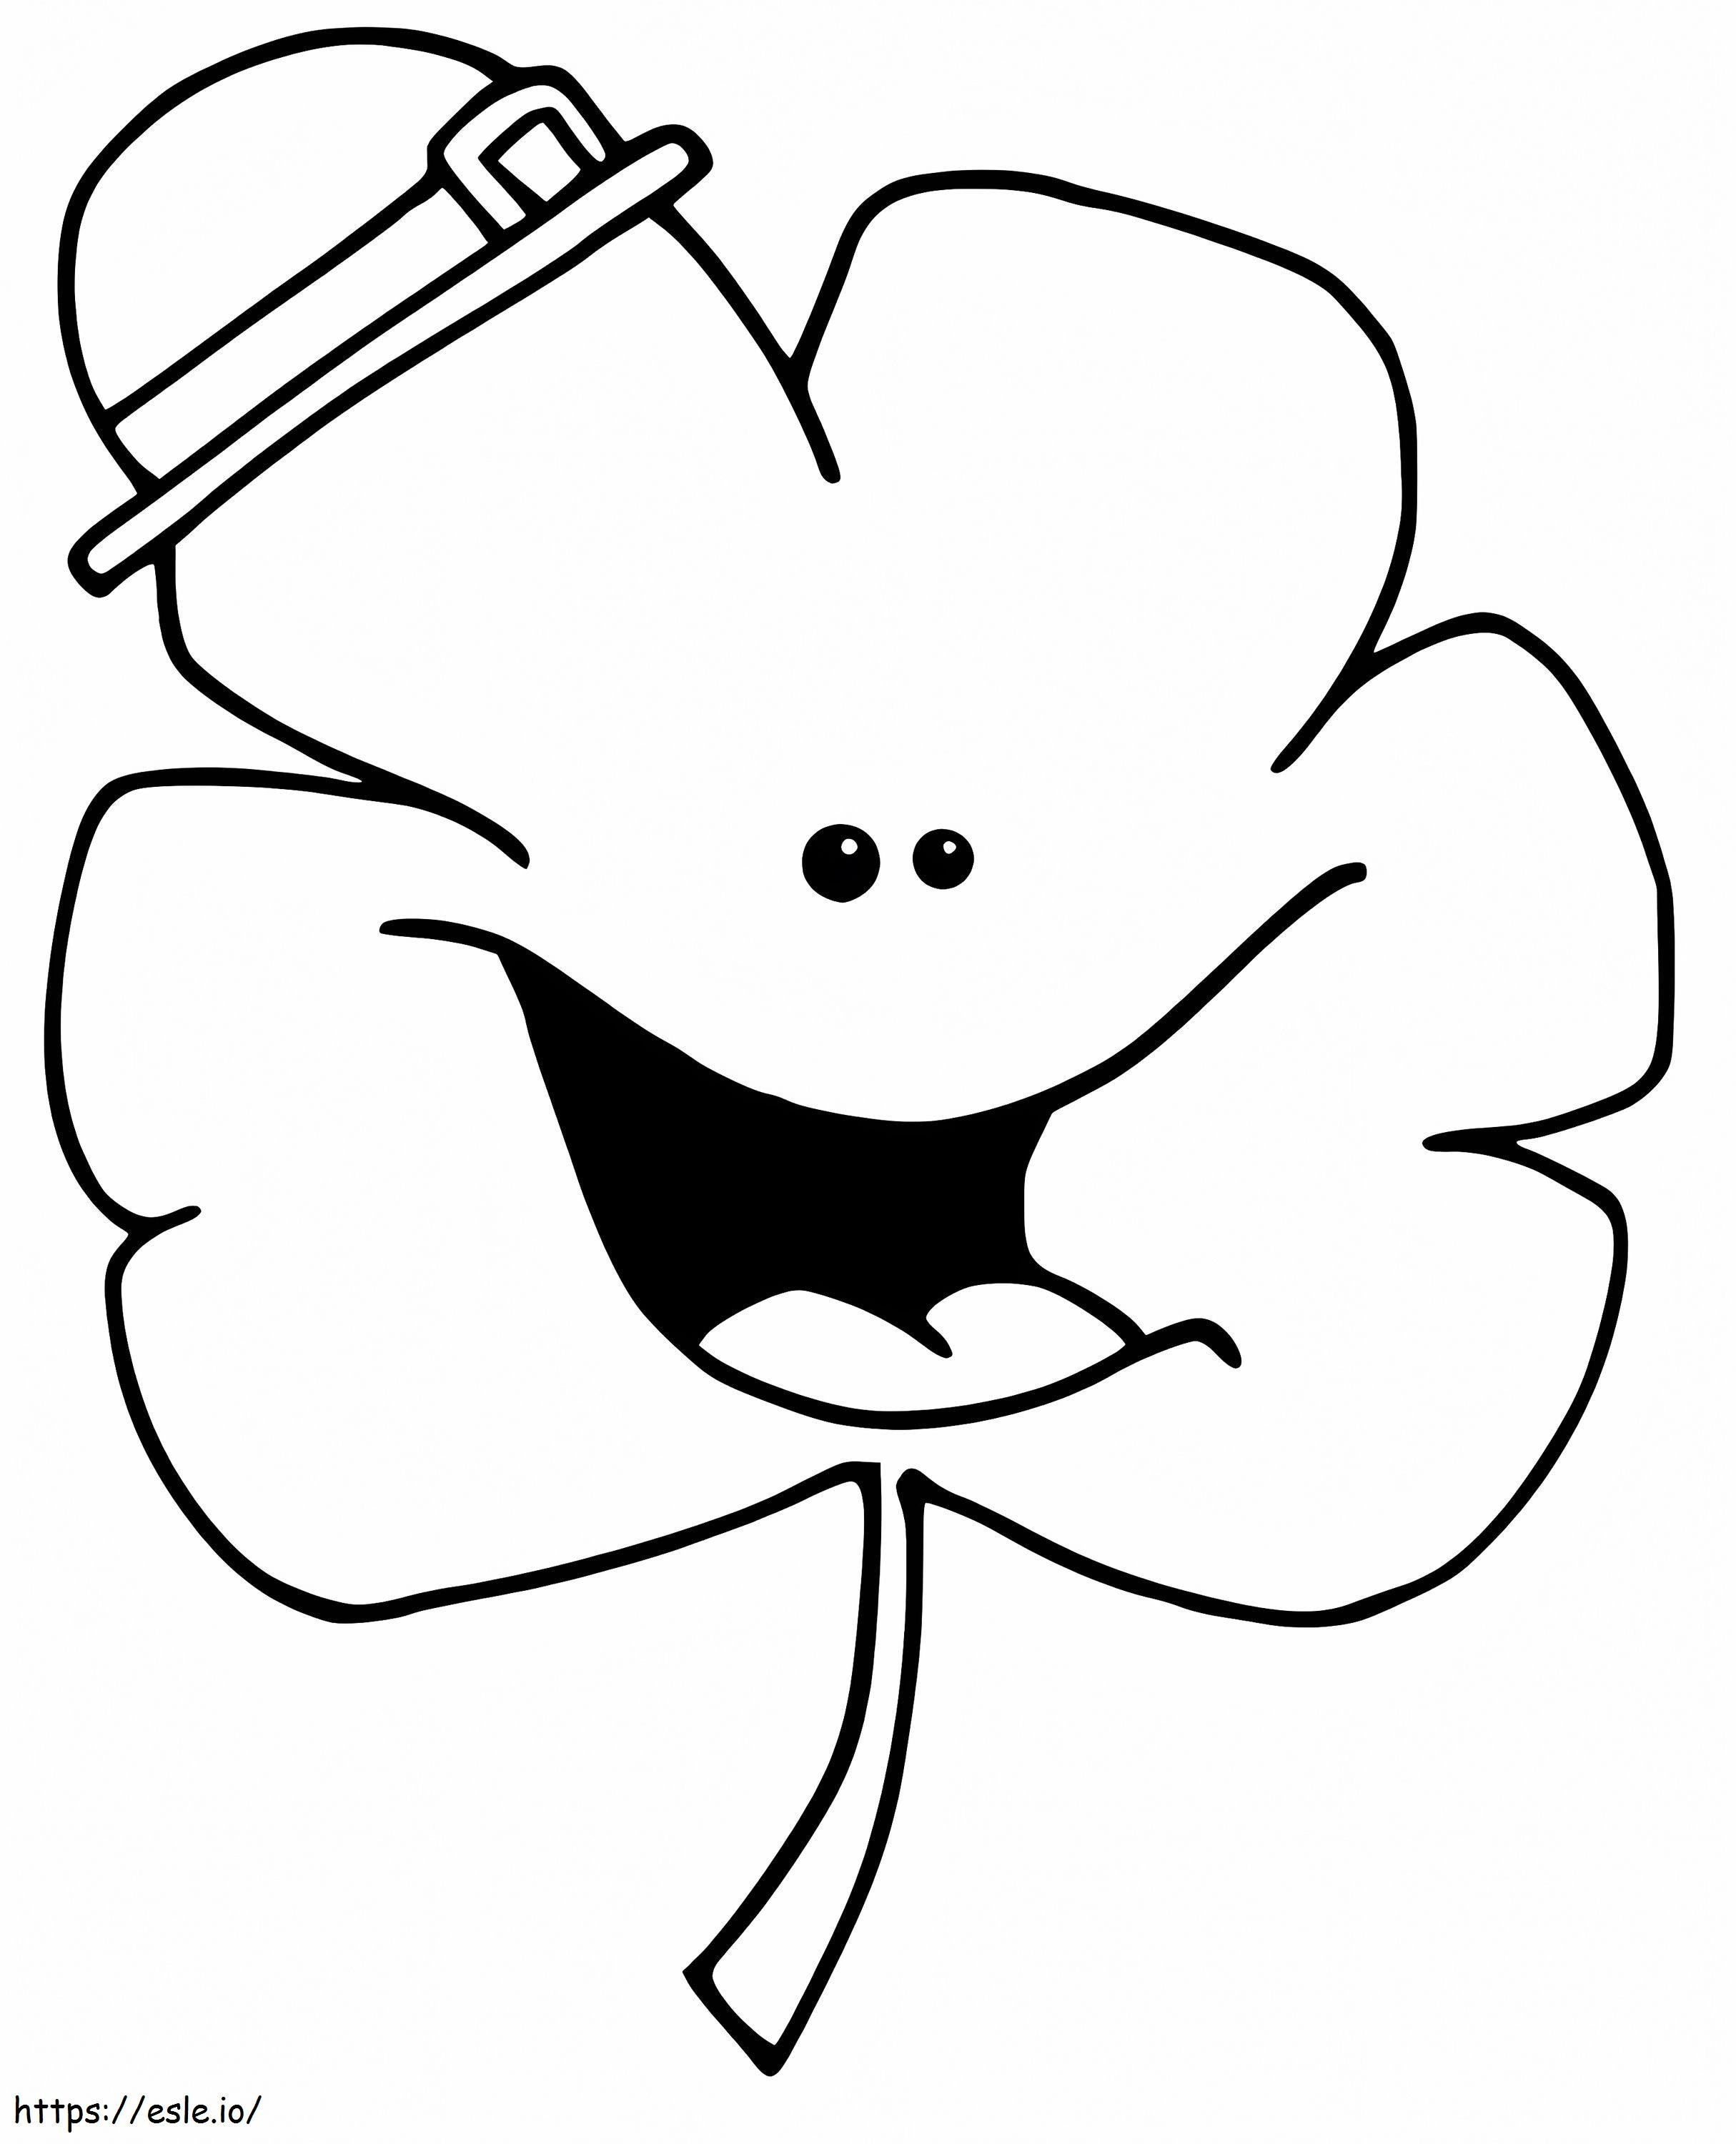 Adorable Shamrock coloring page